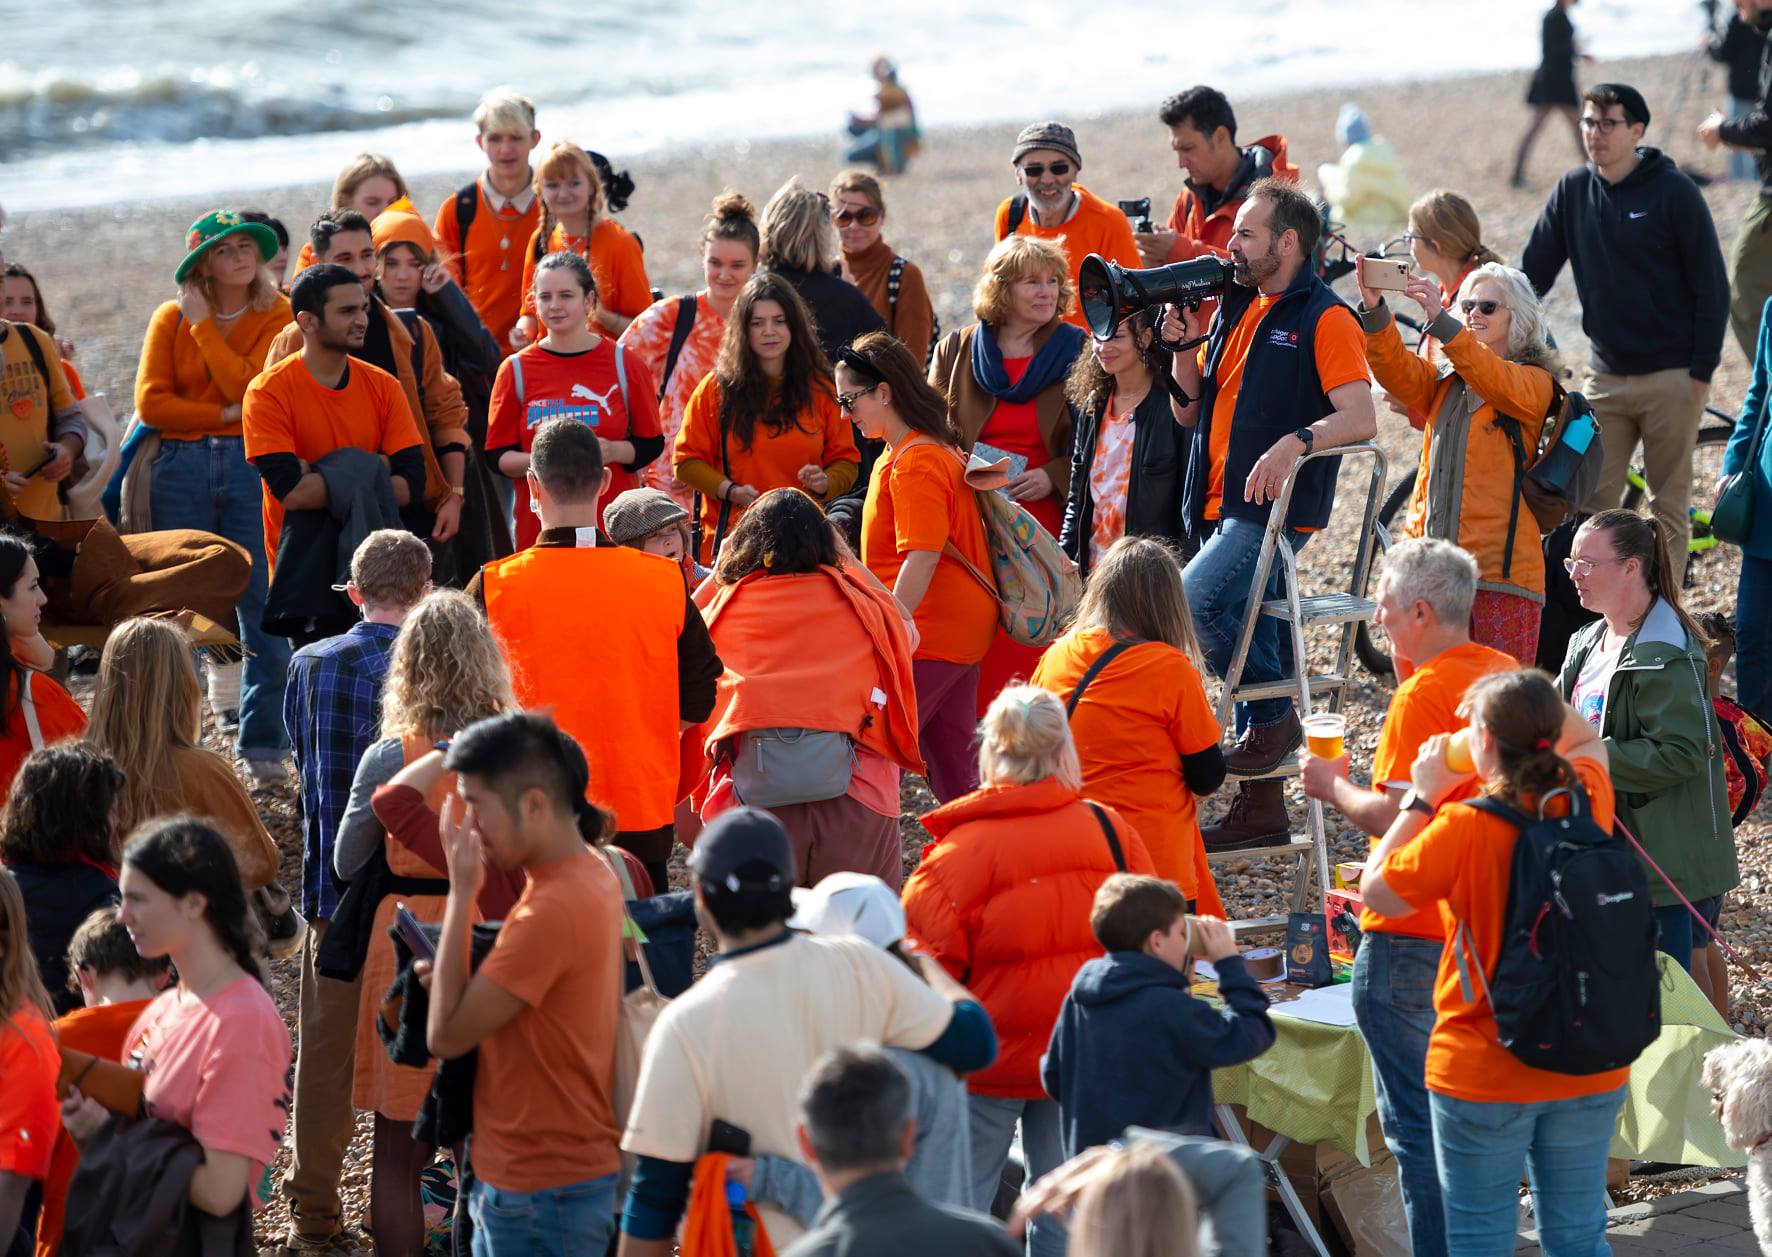 Sanctuary on Sea volunteers all wearing orange to show their solidarity